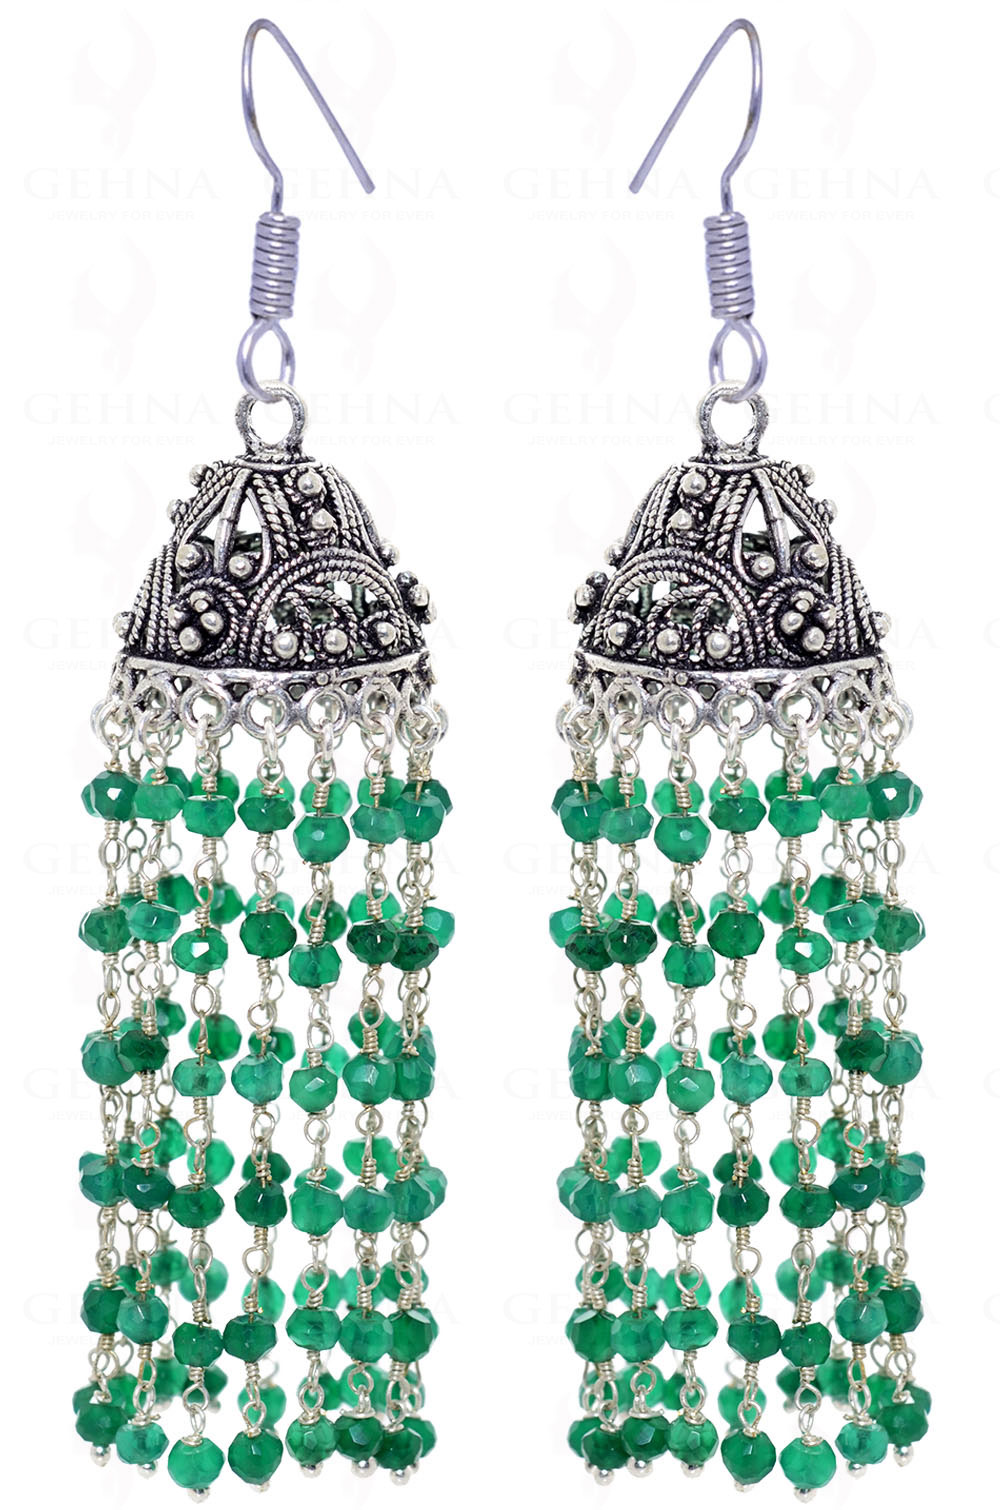 Green Onyx Faceted Knotted Beads In Silver With Oxidized Jhumki GE06-1025